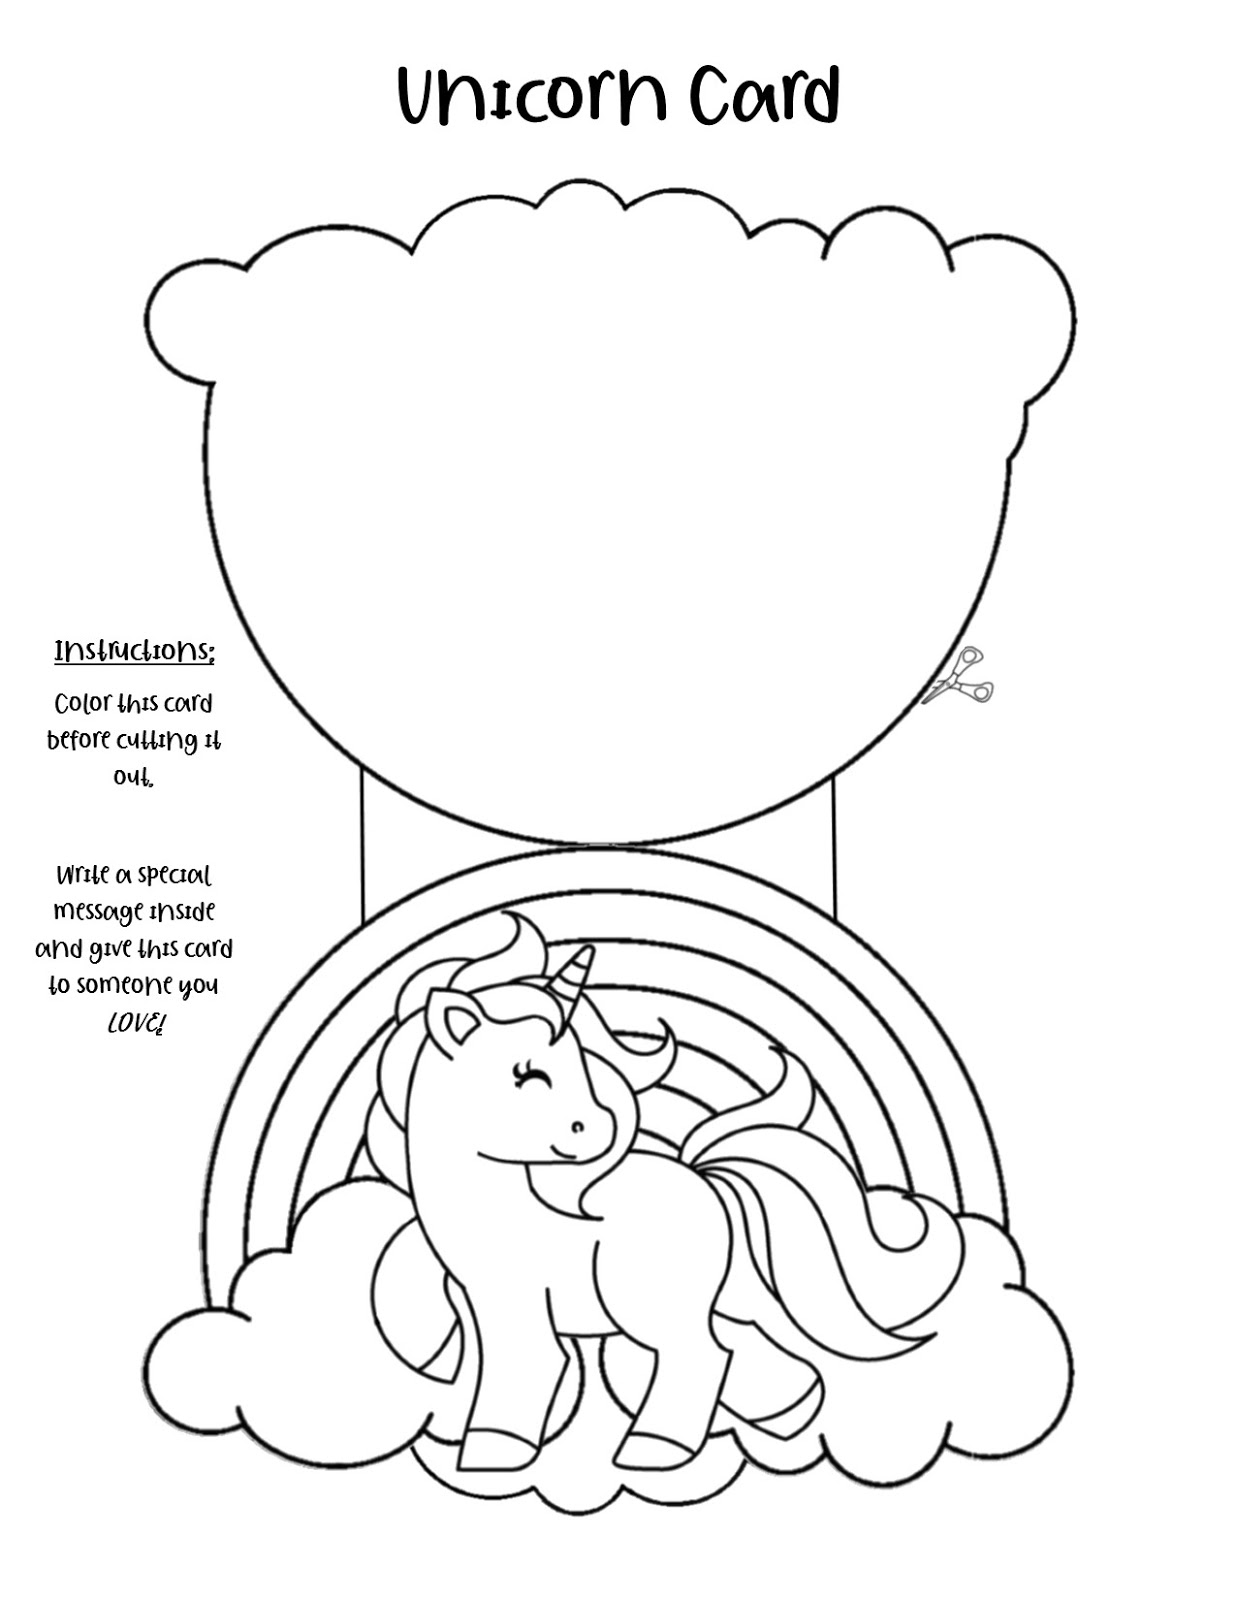 the-learning-curve-printable-unicorn-card